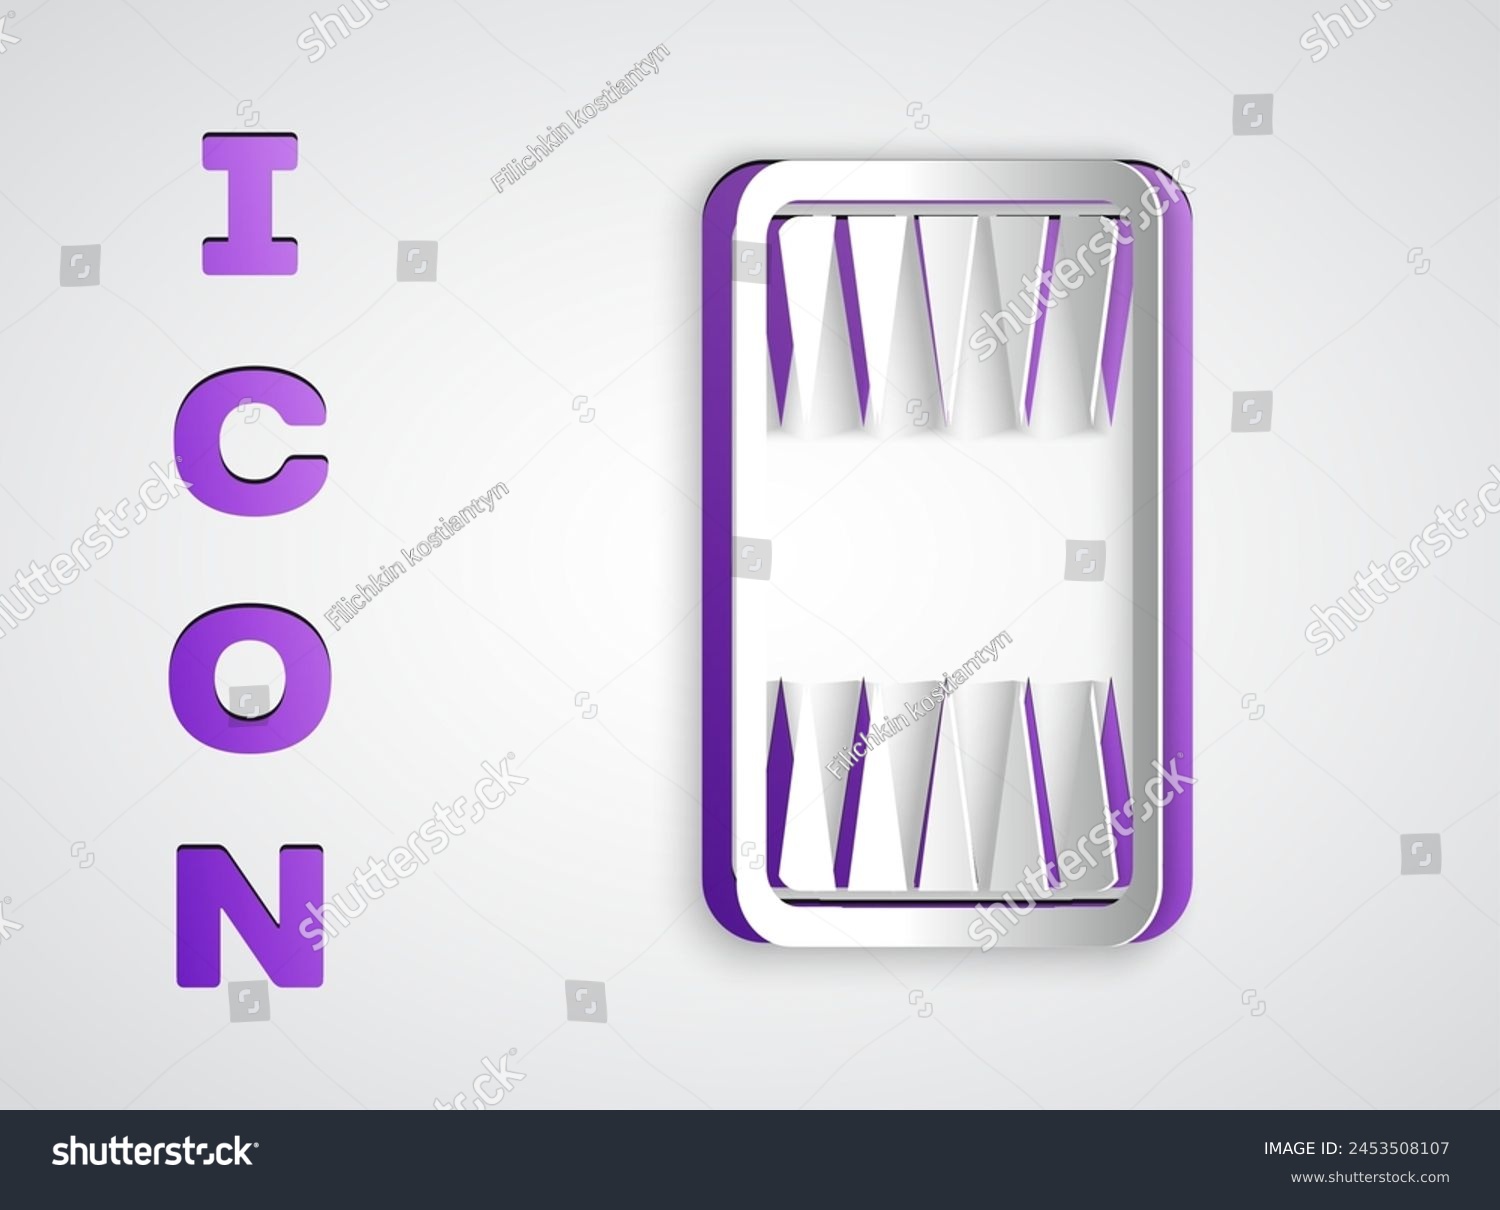 SVG of Paper cut Backgammon board icon isolated on grey background. Paper art style. Vector svg